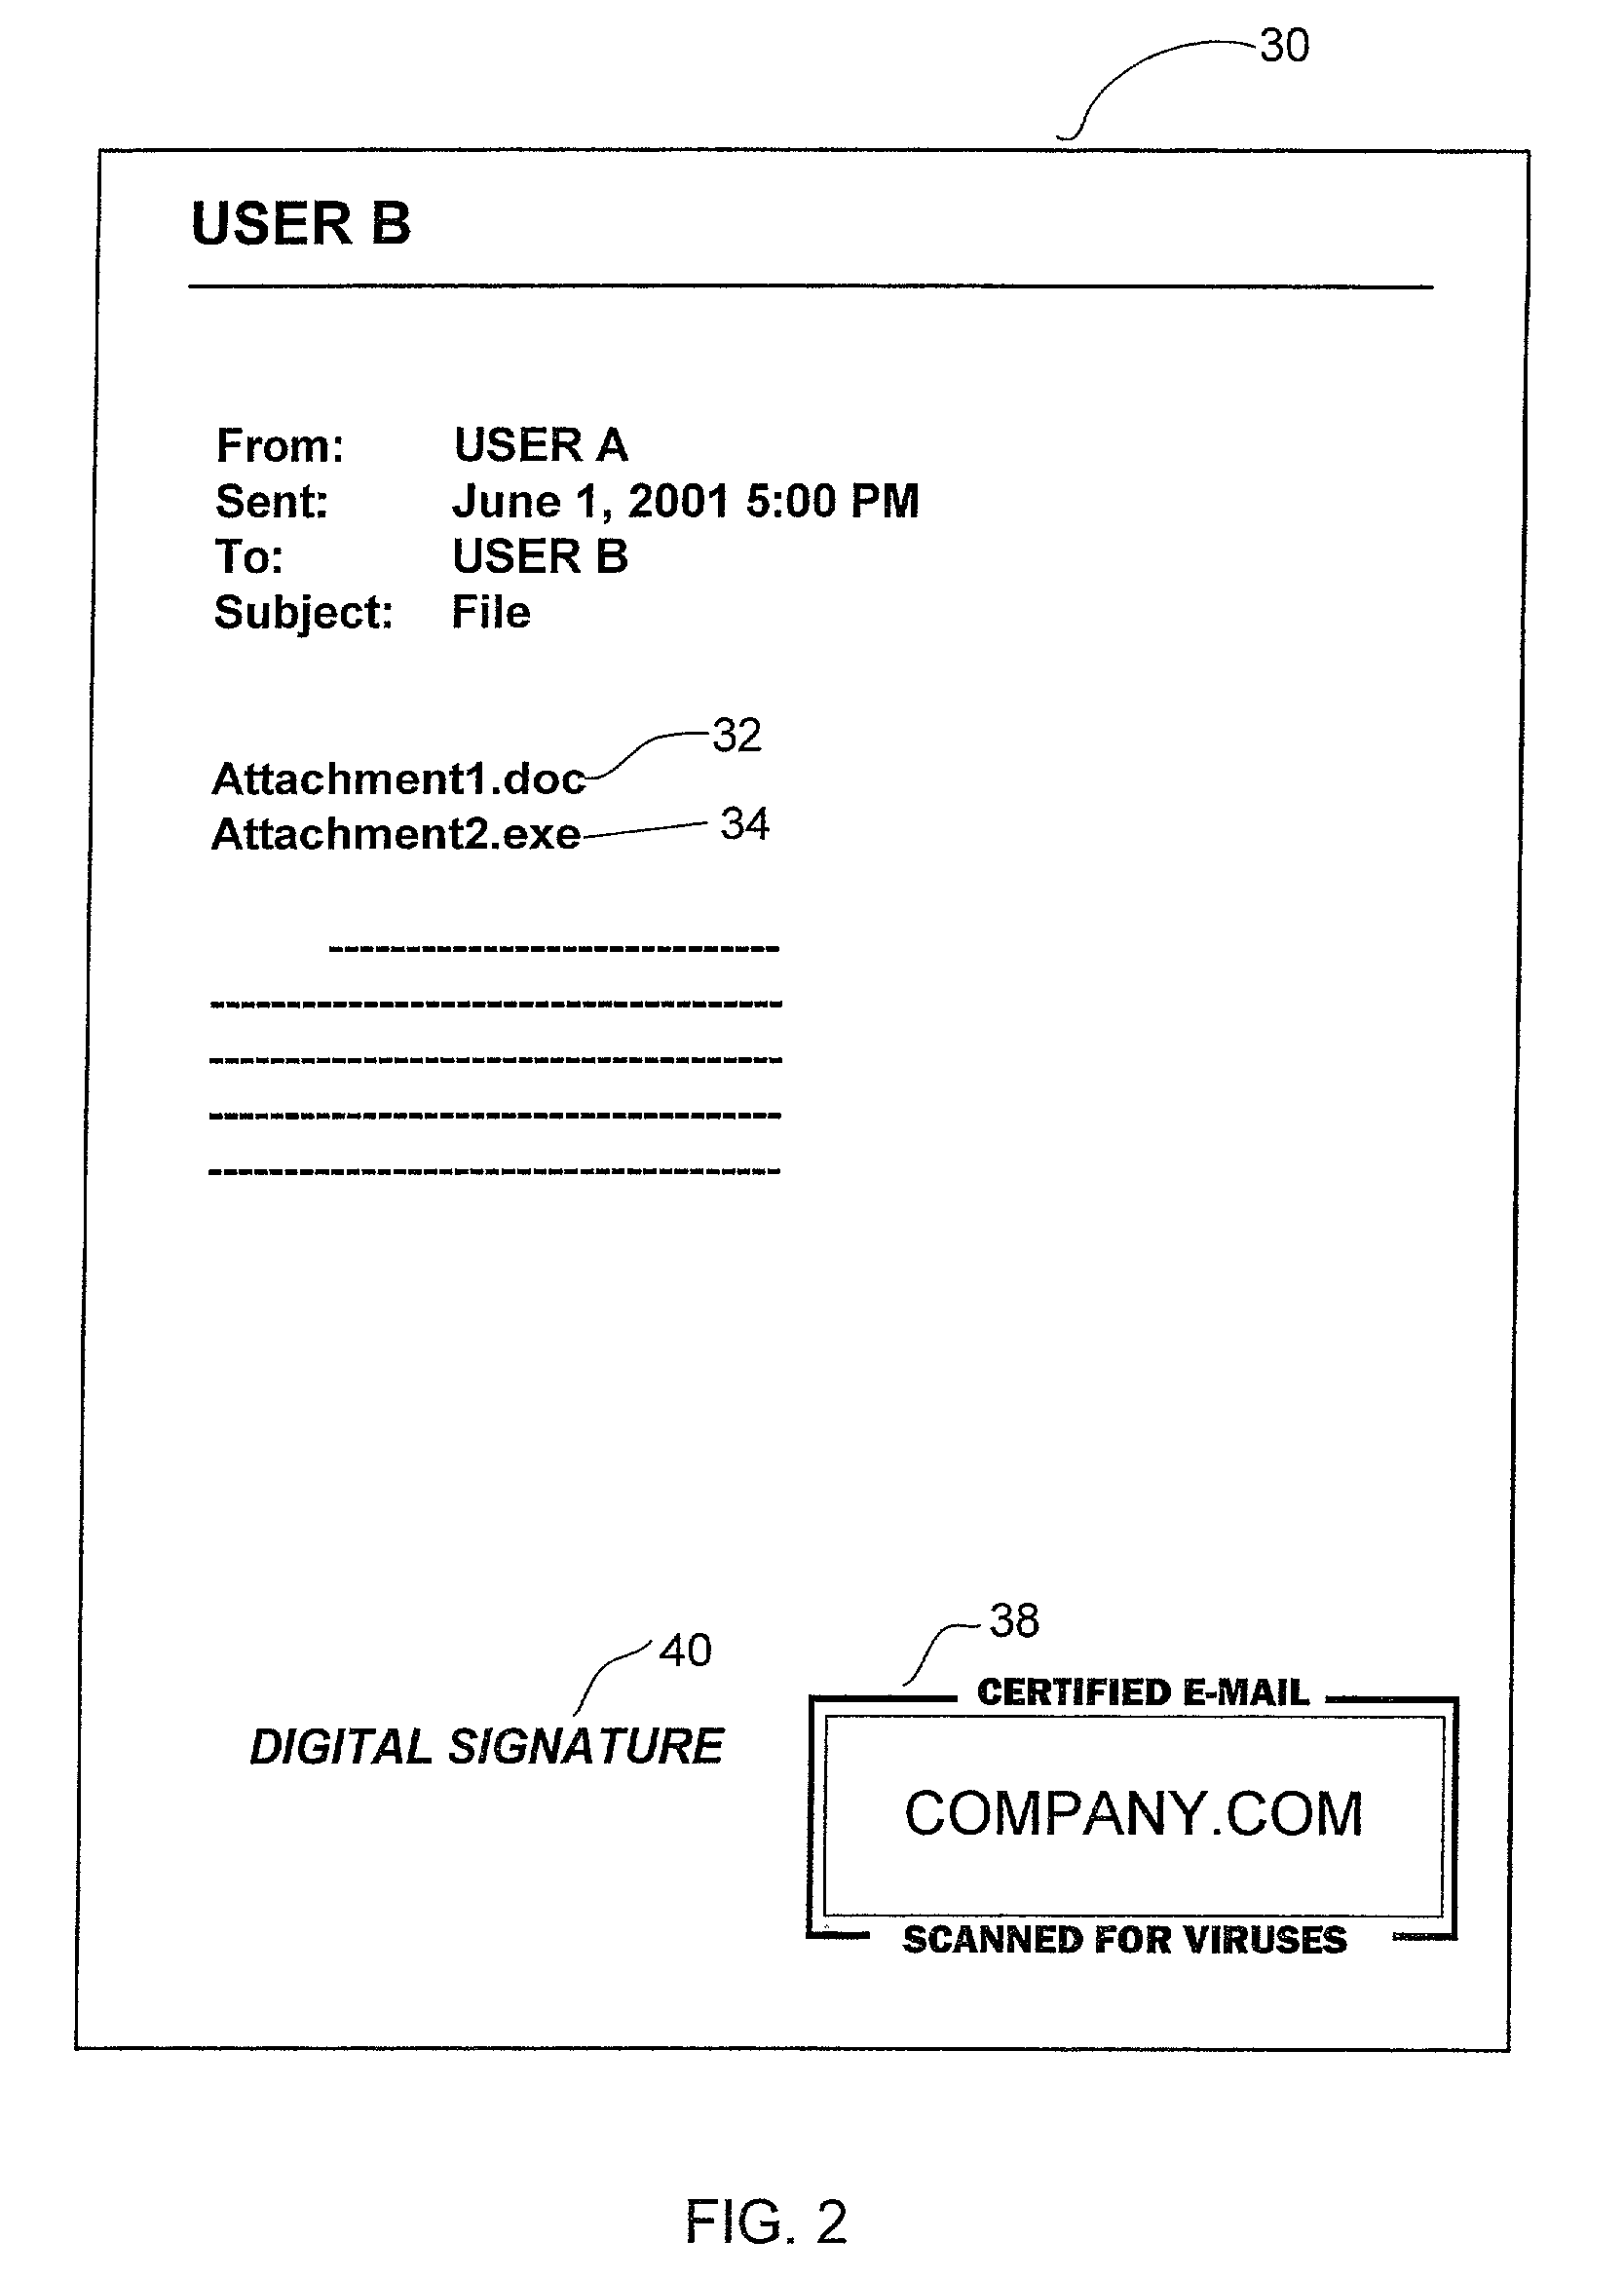 System and method for certifying that data received over a computer network has been checked for viruses